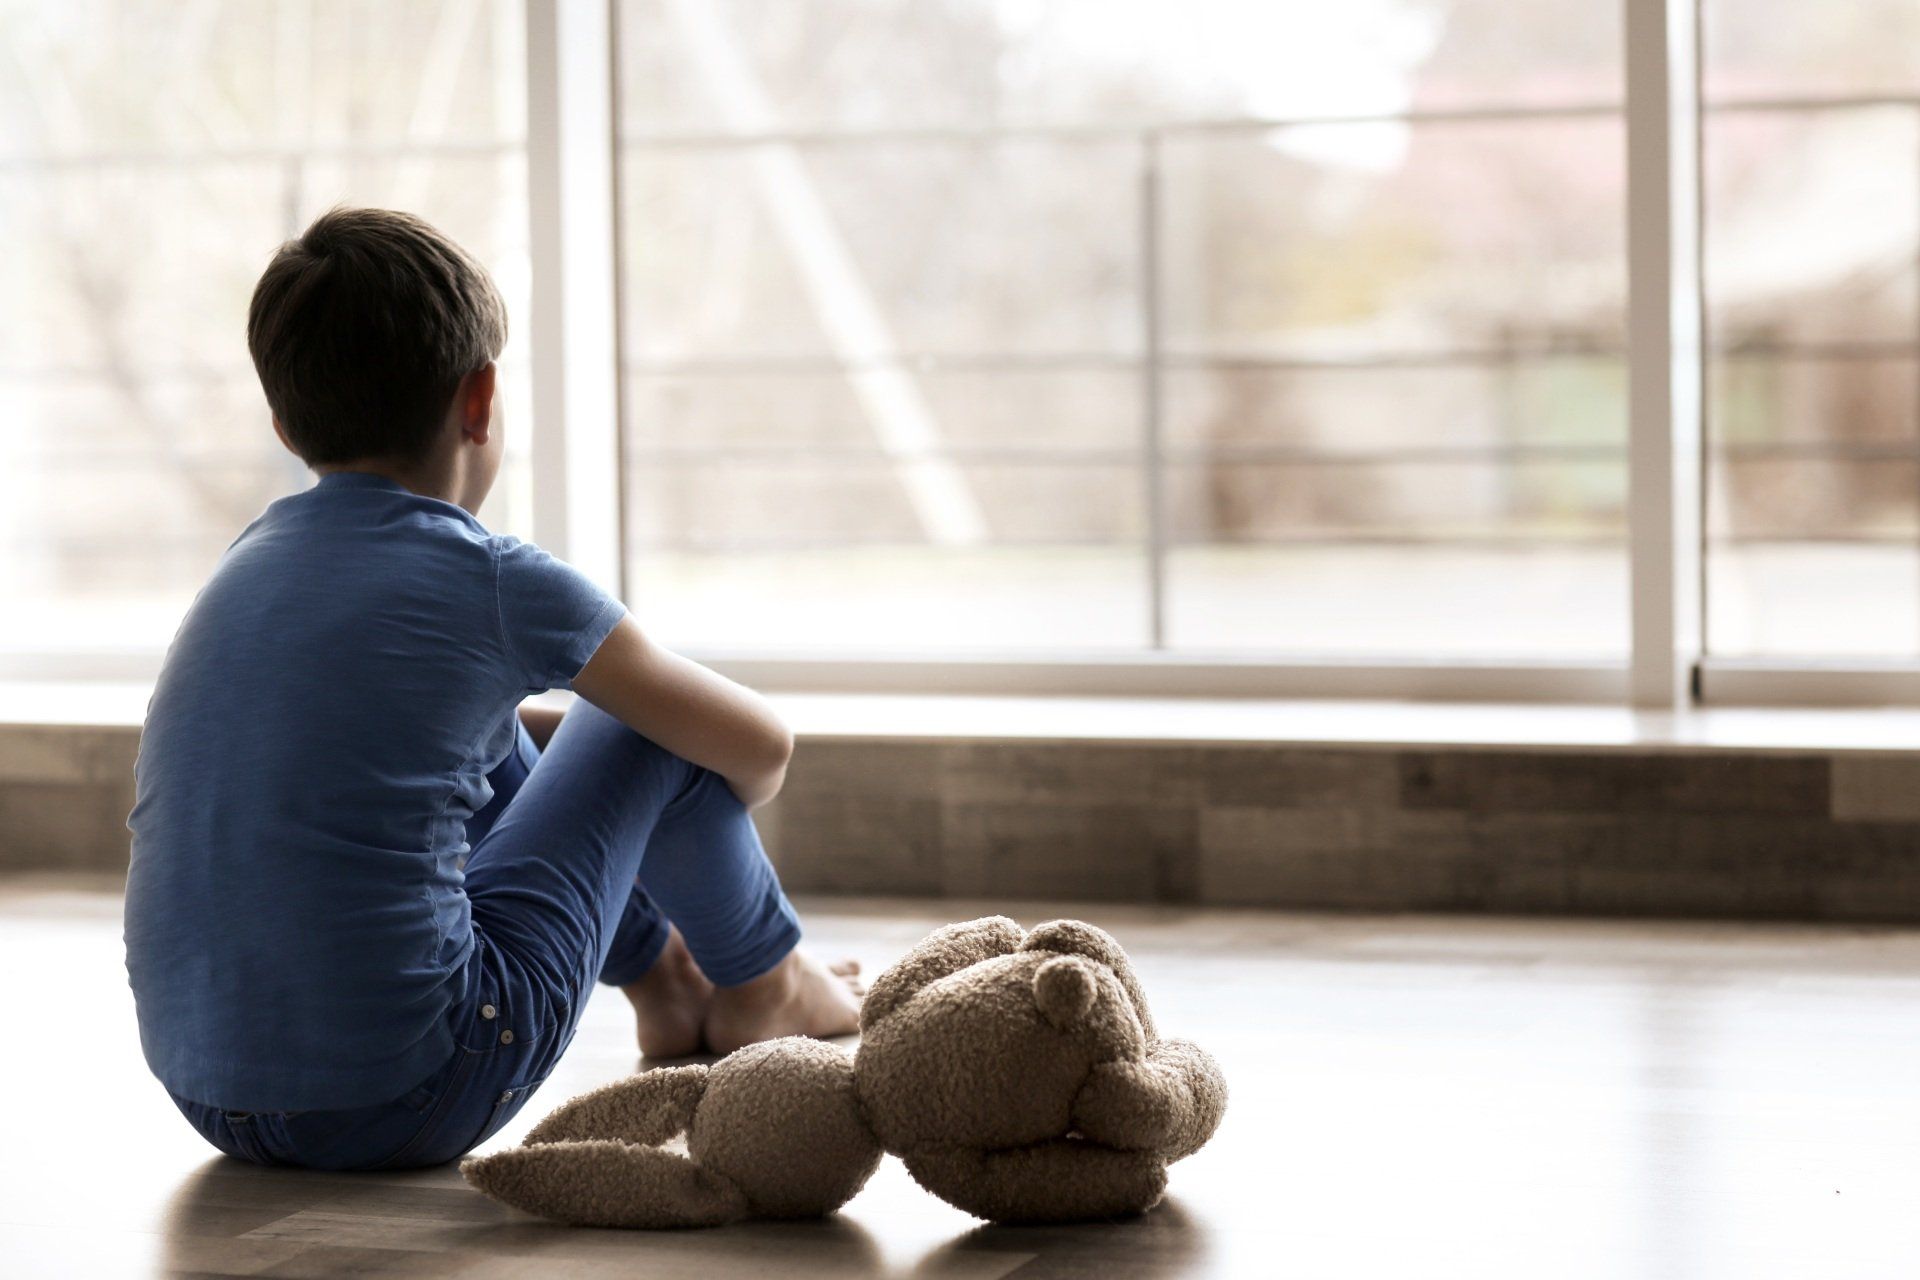 Children experience grief and need special attention